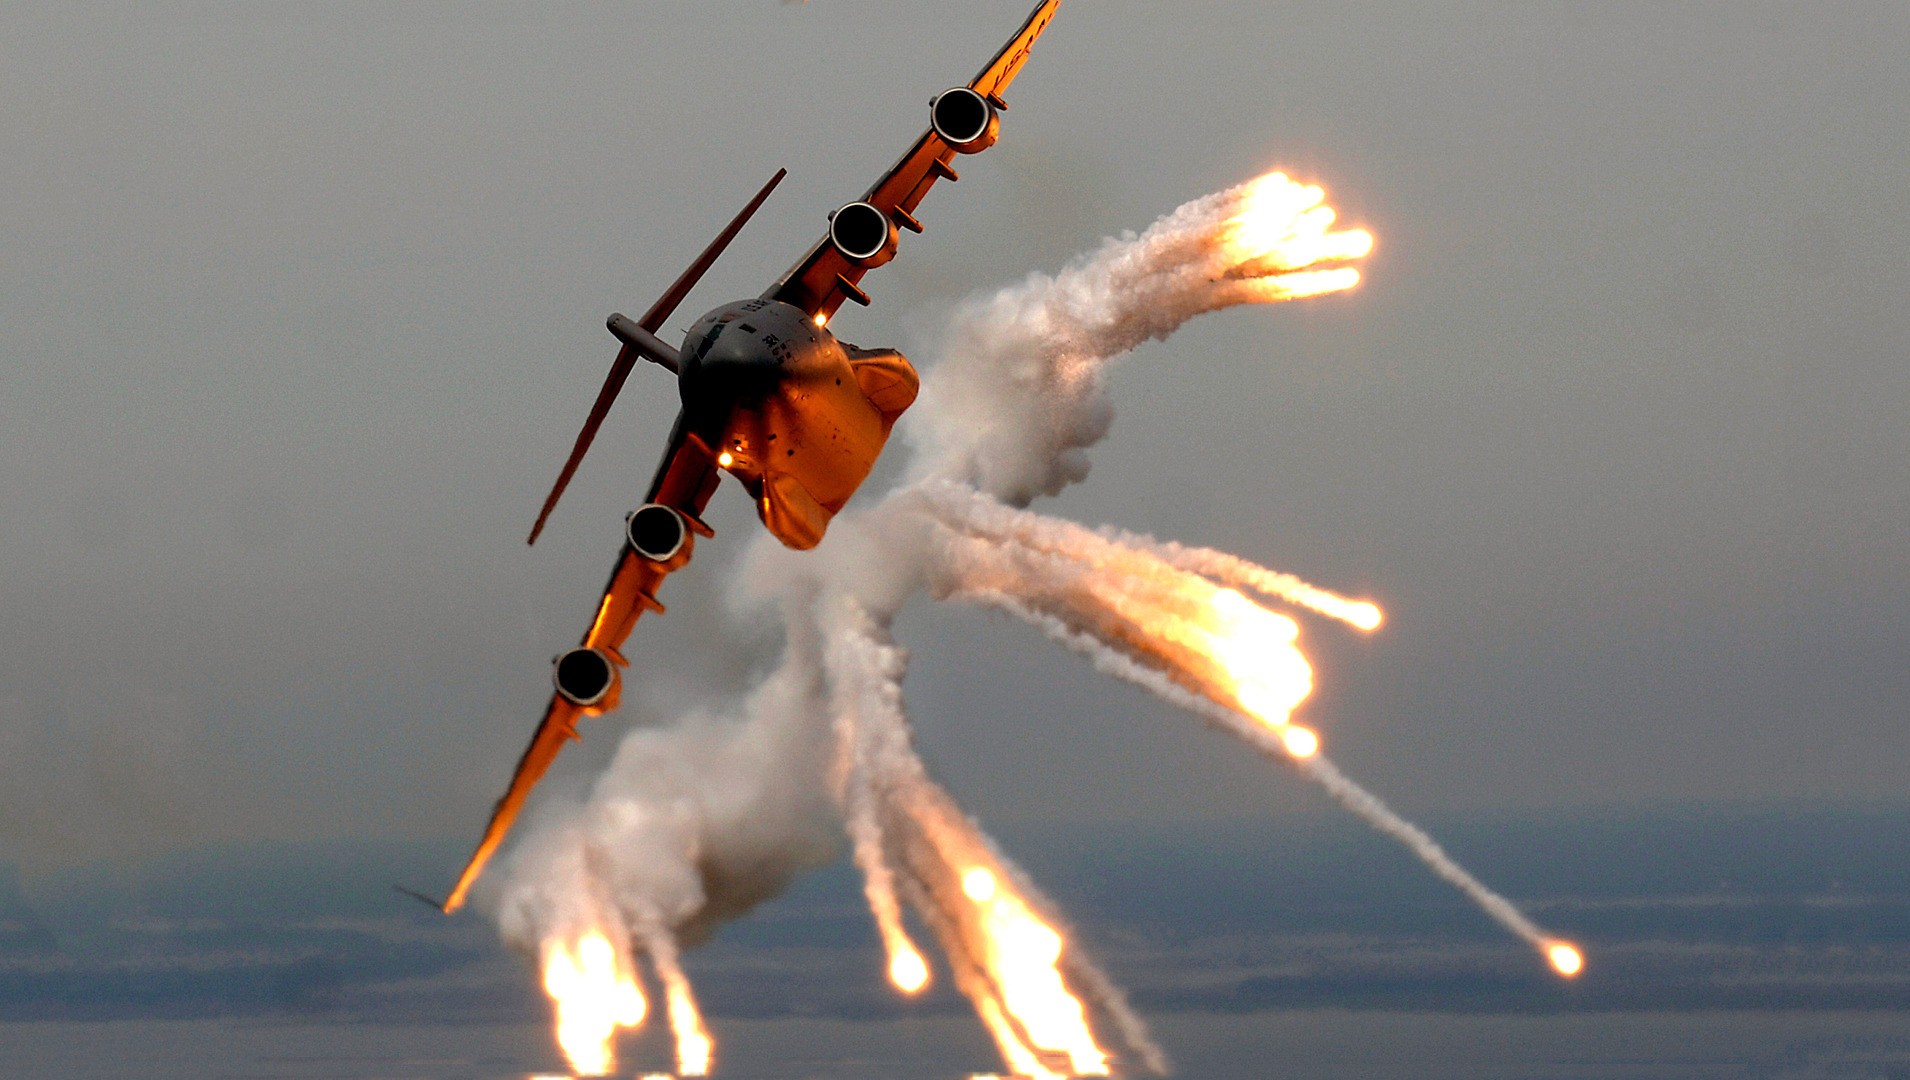 General 1910x1080 vehicle military aircraft Boeing C-17 Globemaster III military vehicle military US Air Force flares American aircraft Boeing aircraft